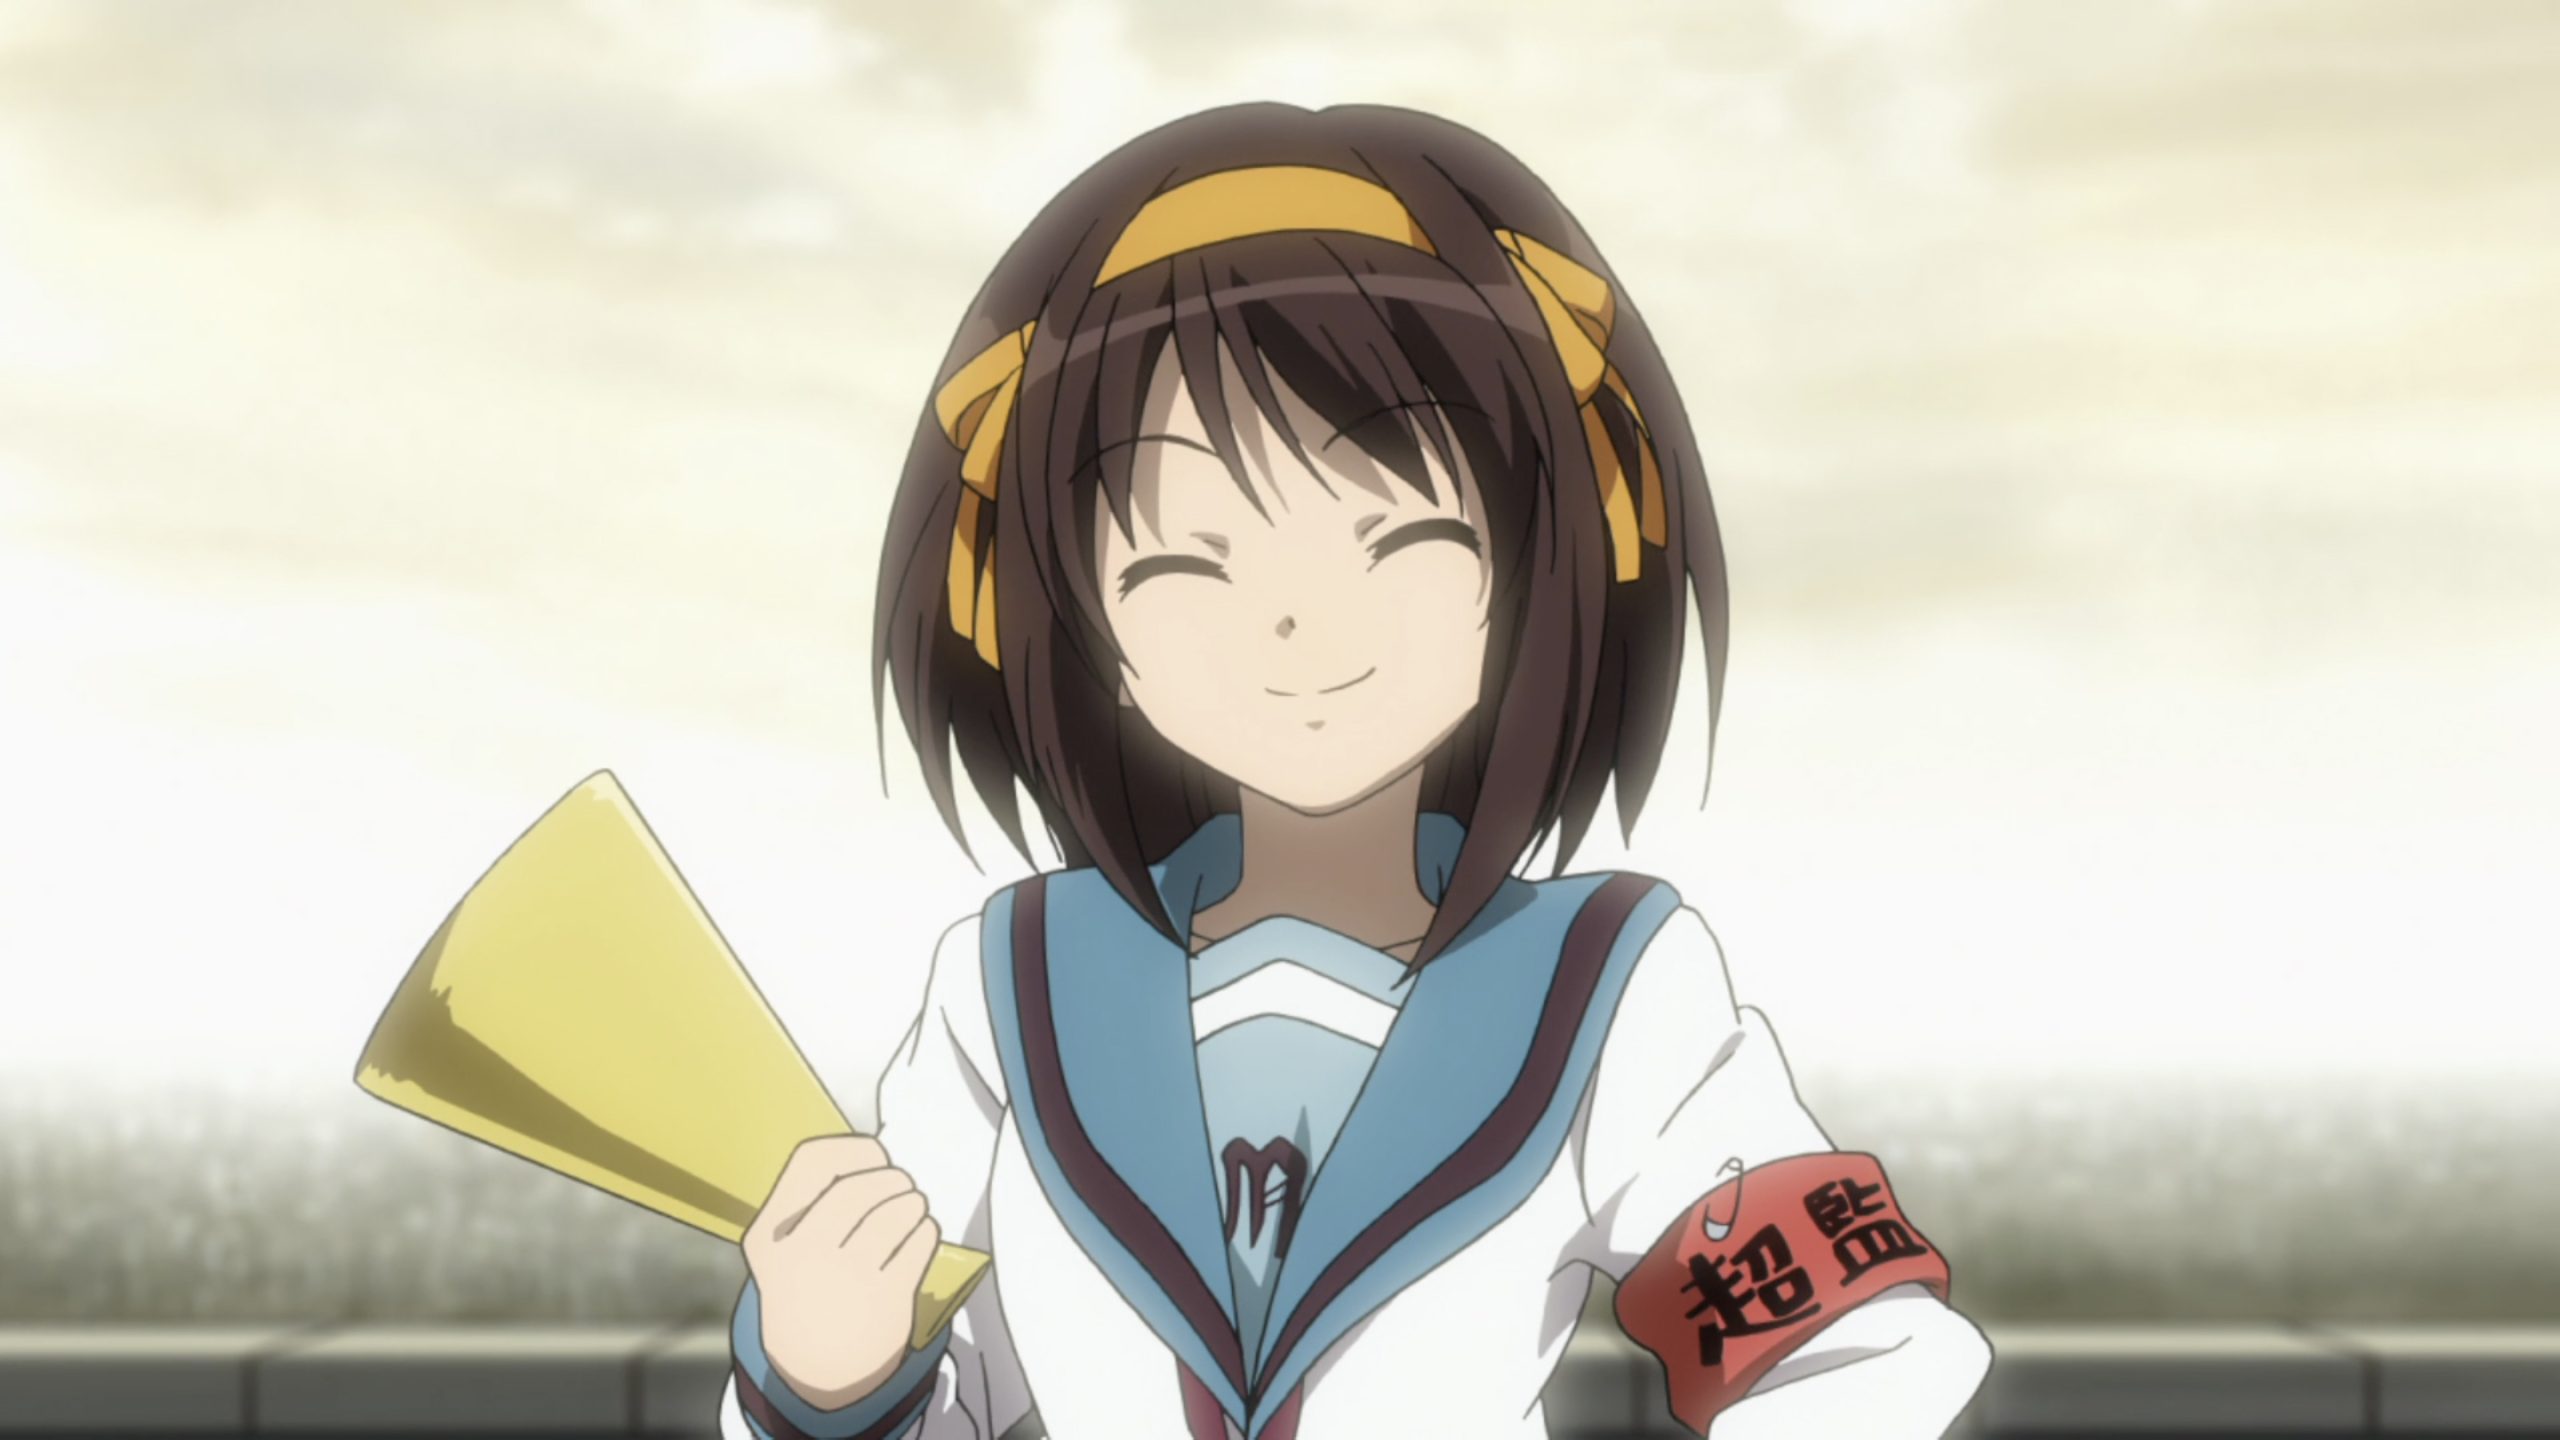 We're making New Year's Resolutions - Also here's a picture of Haruhi